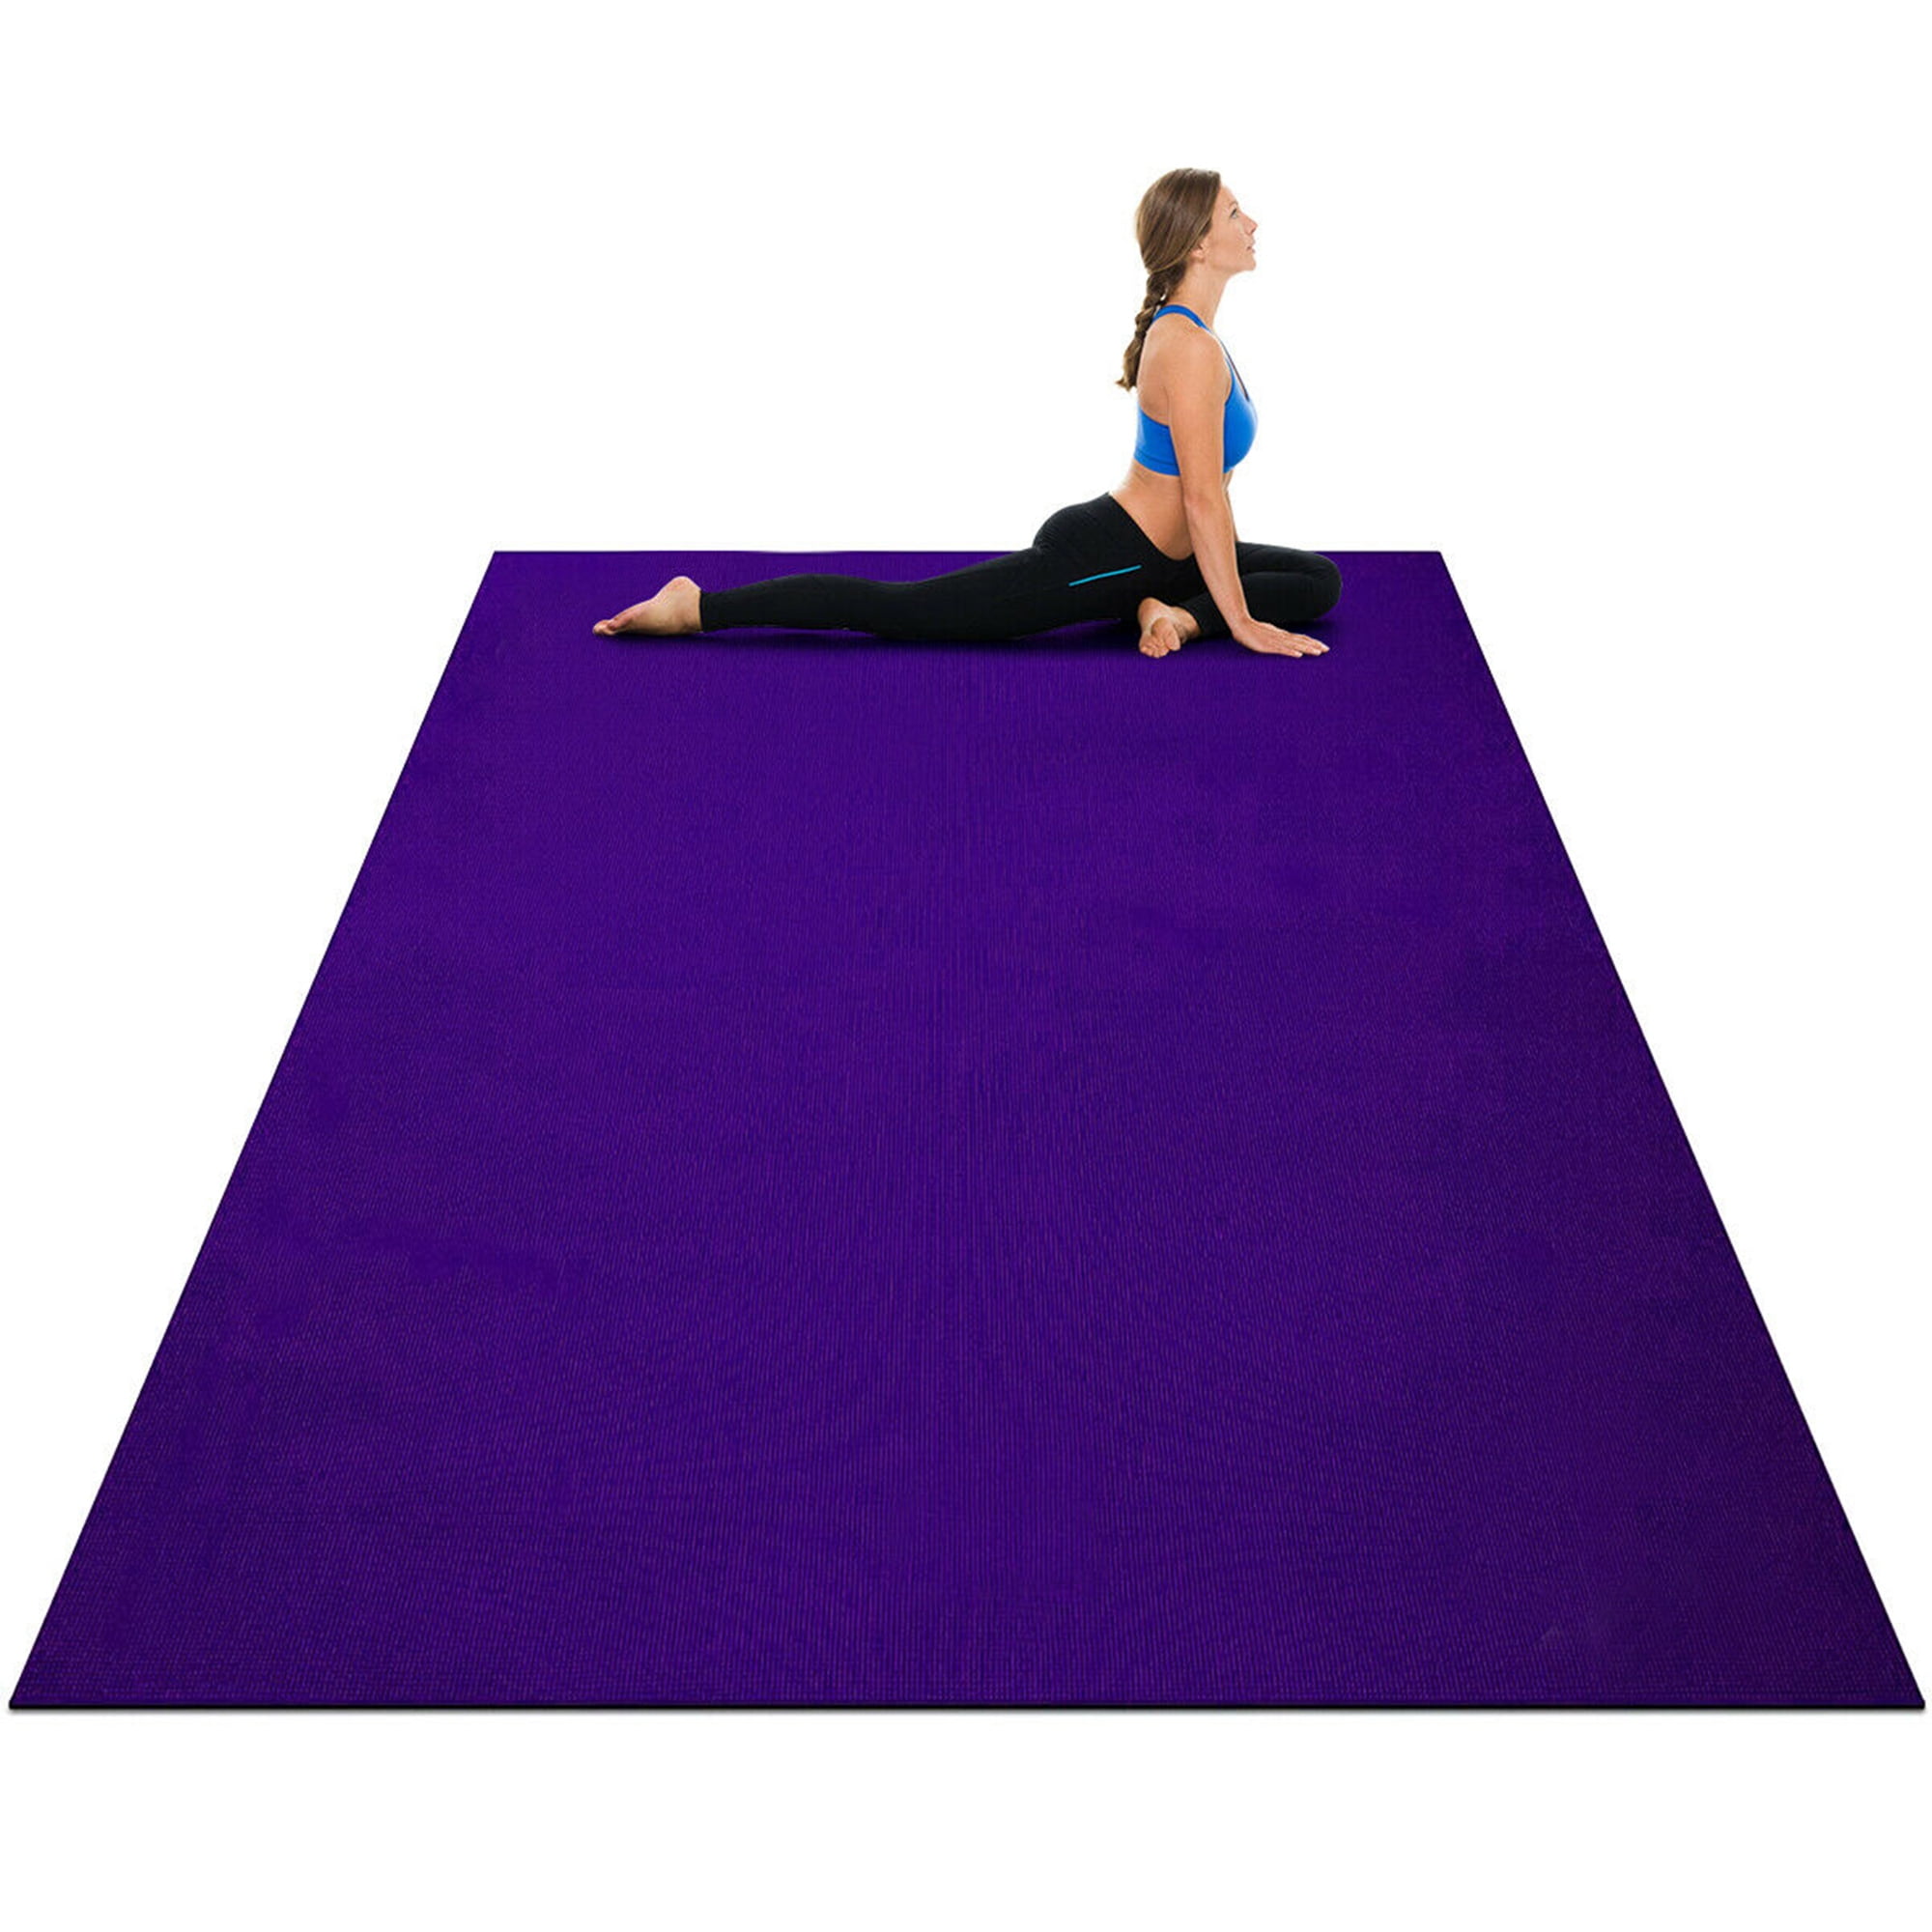 YOGA PILATES EXERCISE GYM MAT CARRY STRAP LARGE THICK NON-SLIP FLOOR MATS NBR 